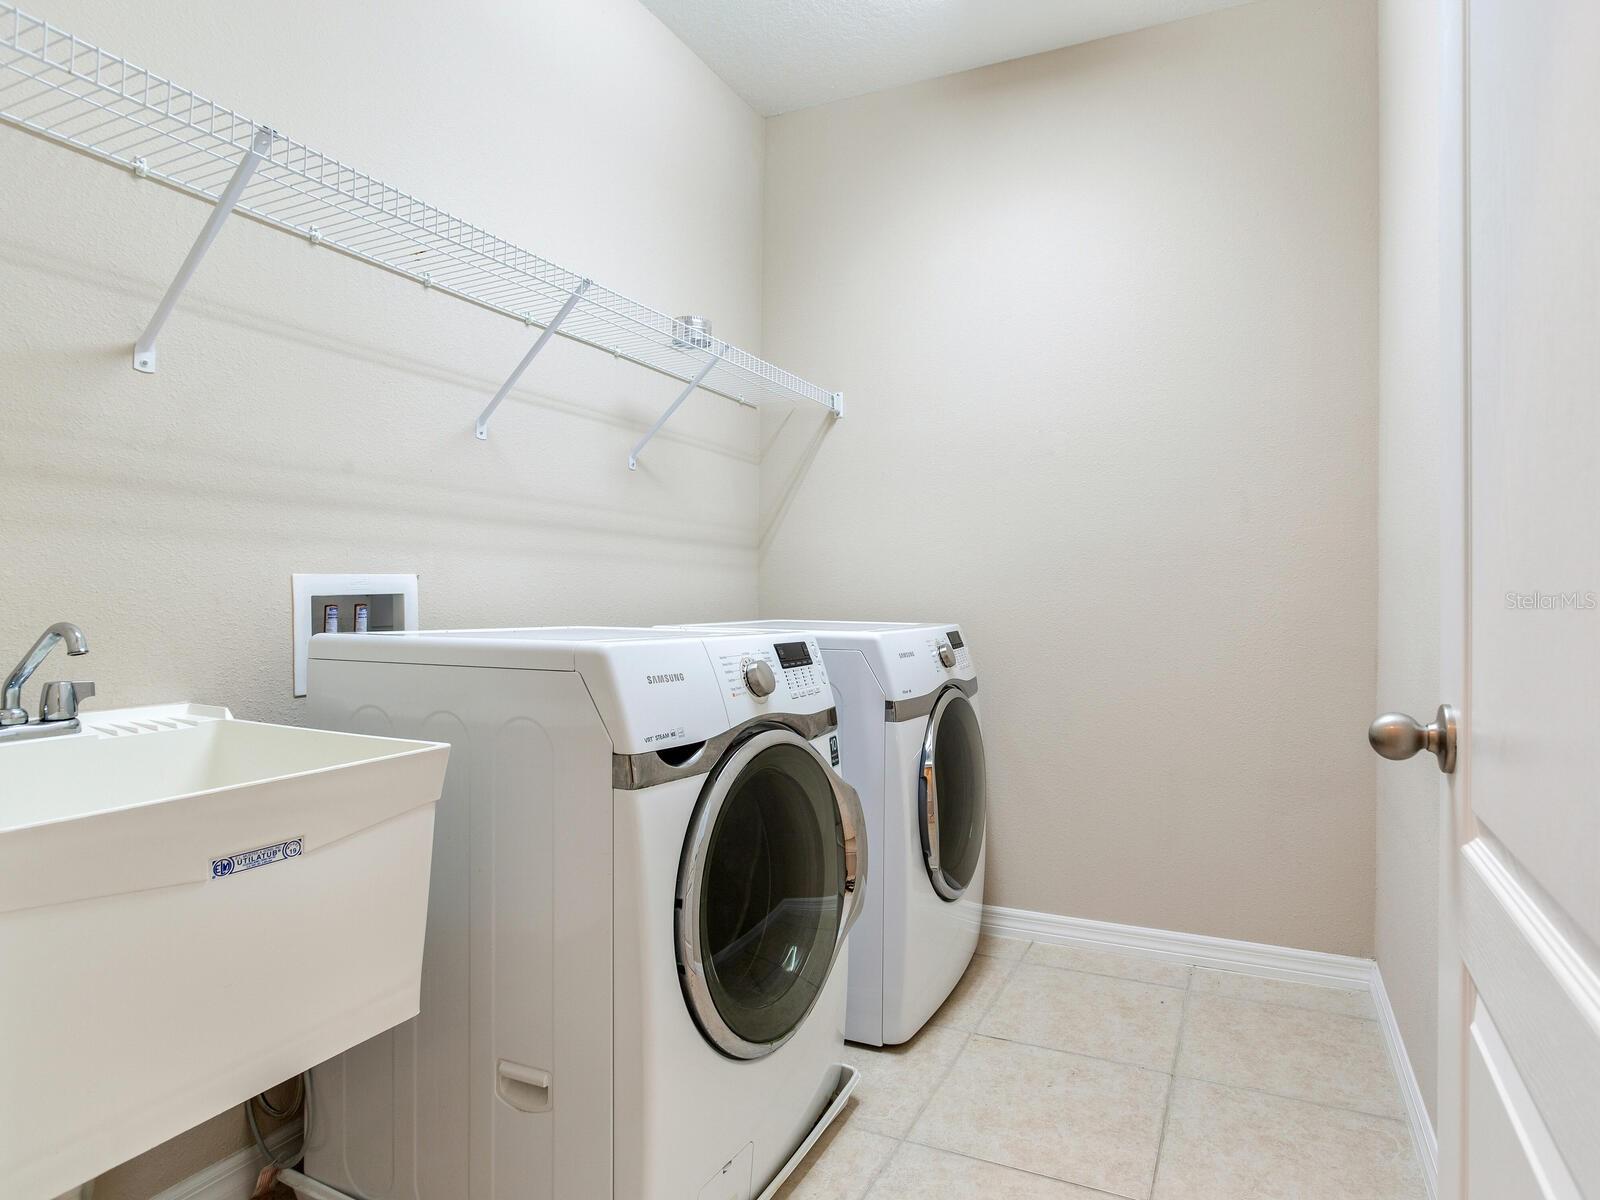 Frontload Full size washer and dryer upstair laudryroom with a sink